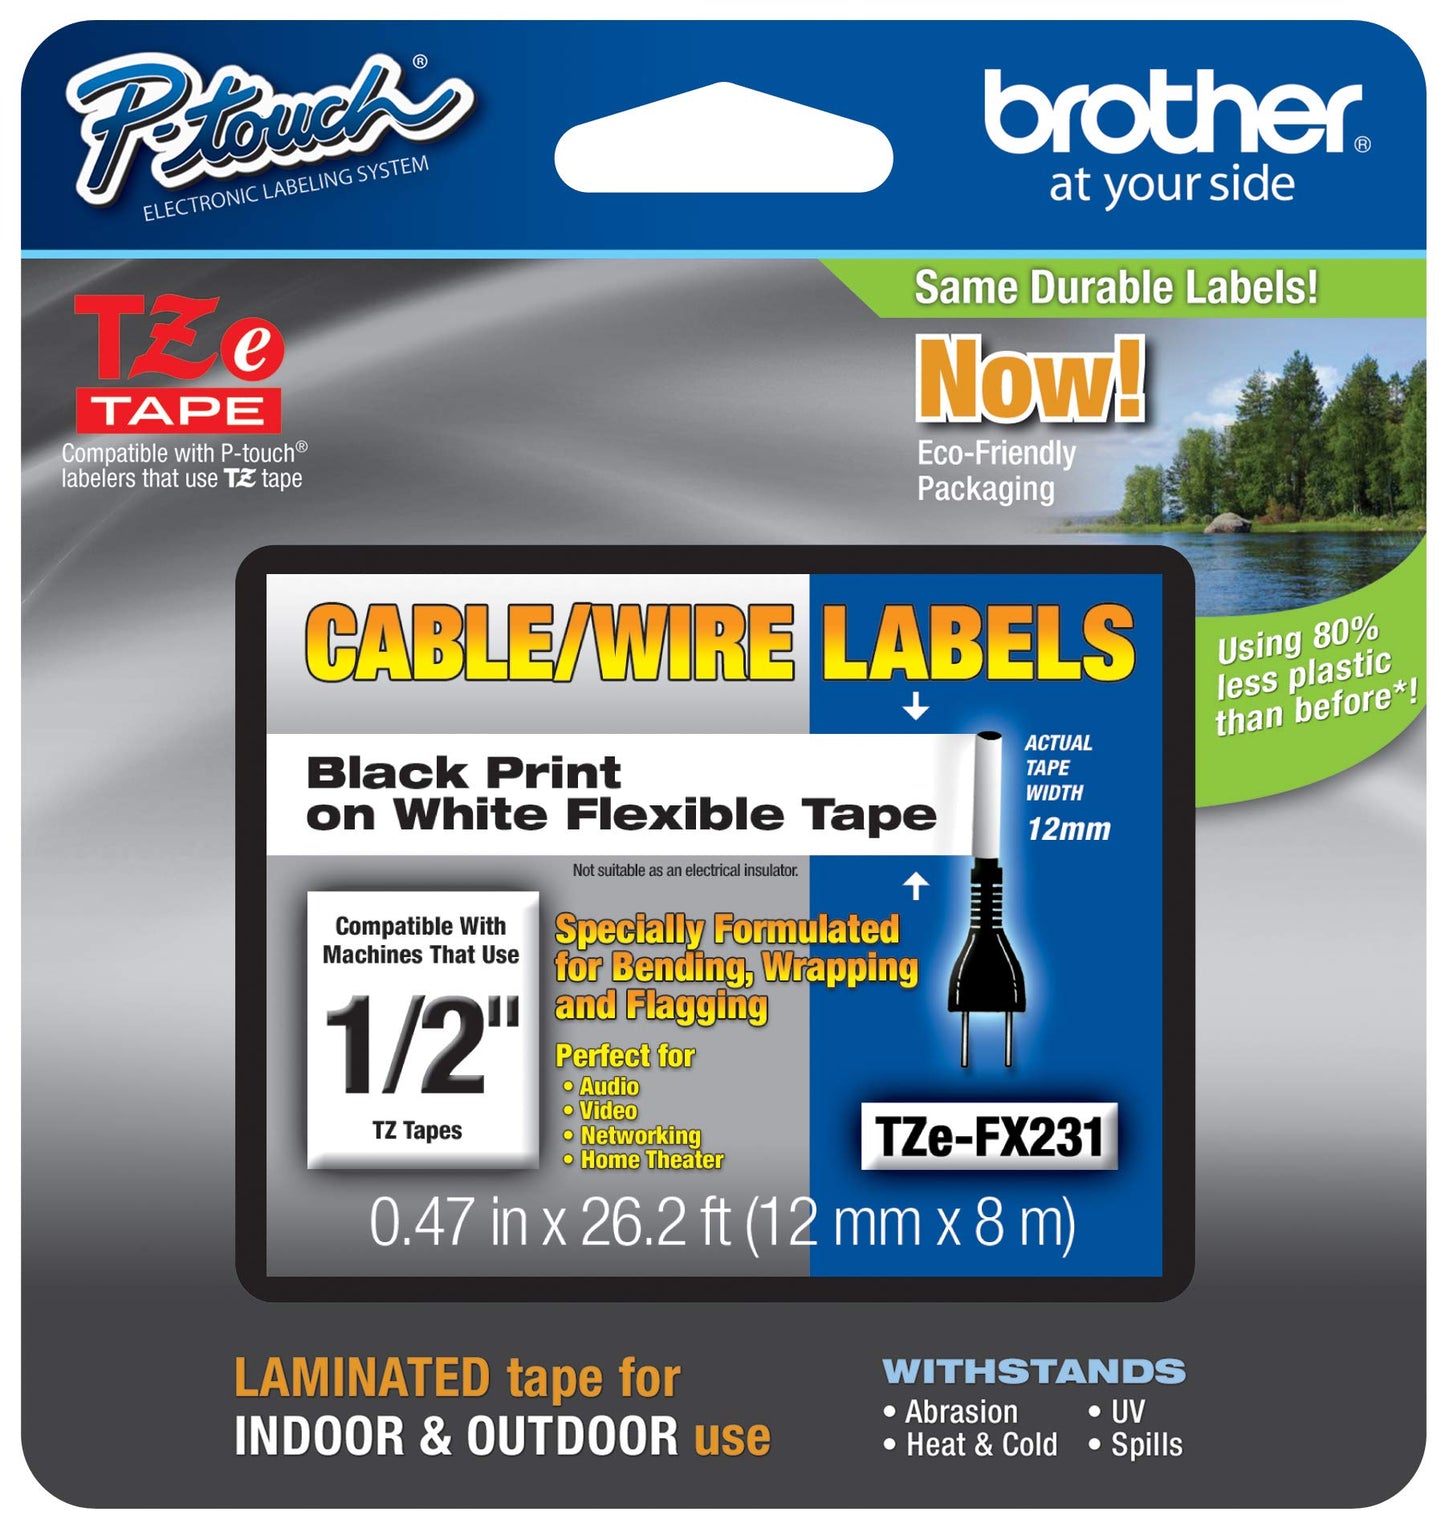 Brother Genuine P-touch TZE-MQG35 Tape, 1/2" (0.47") Wide Standard Laminated Tape, White on Lime Green, Laminated for Indoor or Outdoor Use, Water-Resistant, 0.47" x 16.4' (12mm x 5M), TZEMQG45